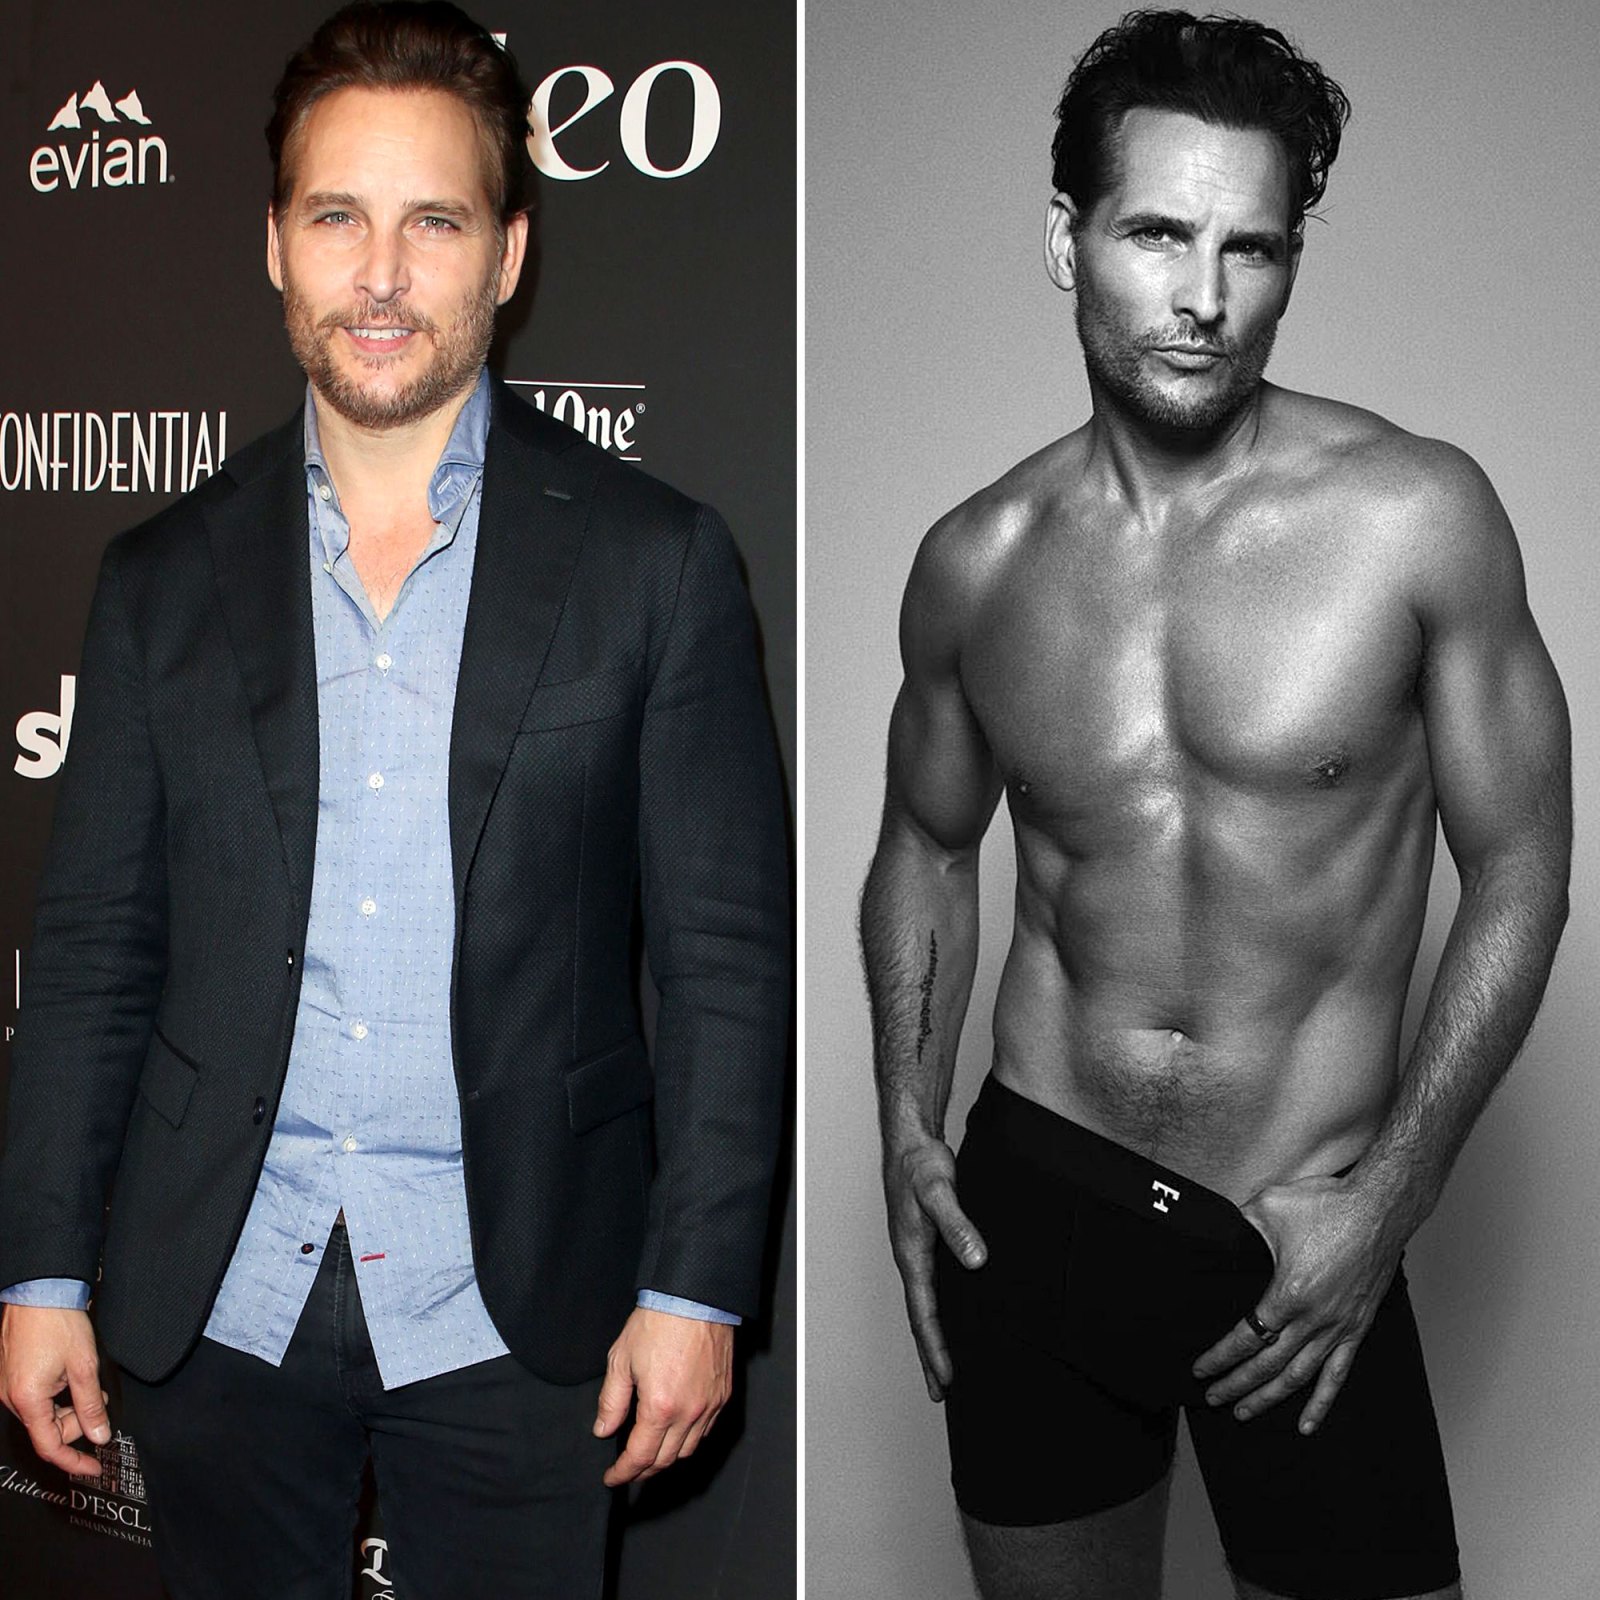 Peter Facinelli Says He Become More Focused Health Amid Pandemic